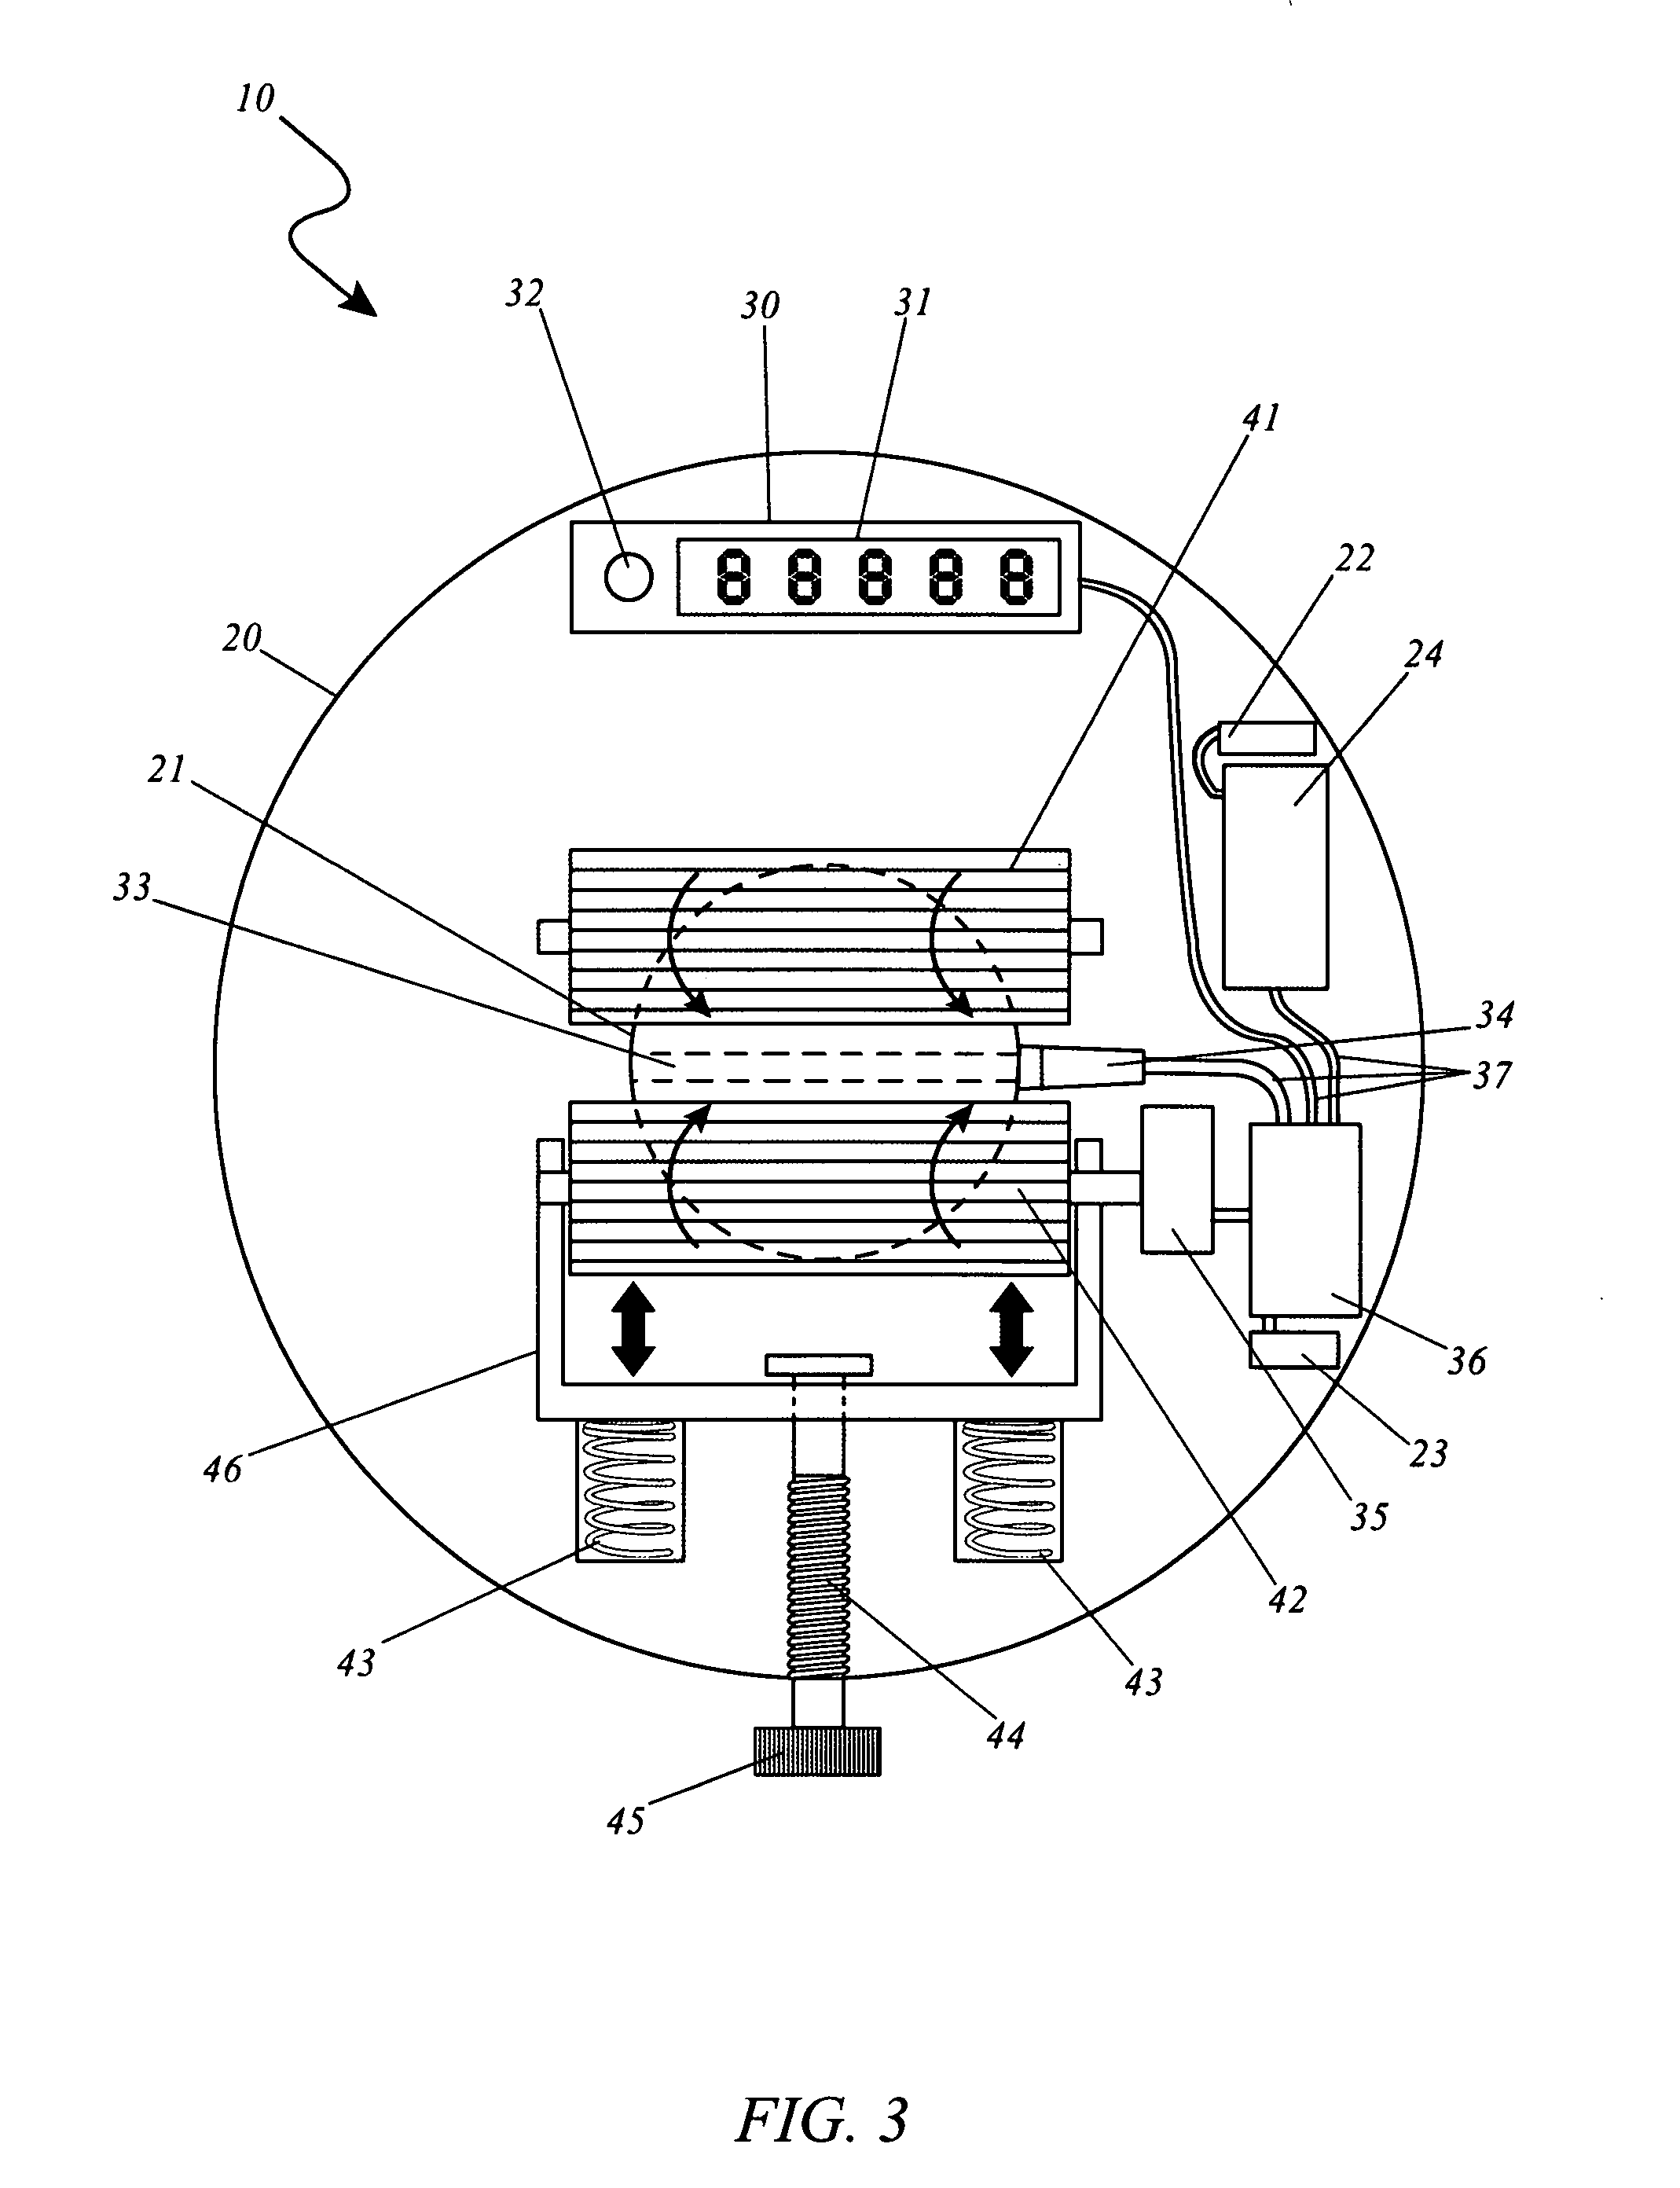 Automatic cord length measuring device